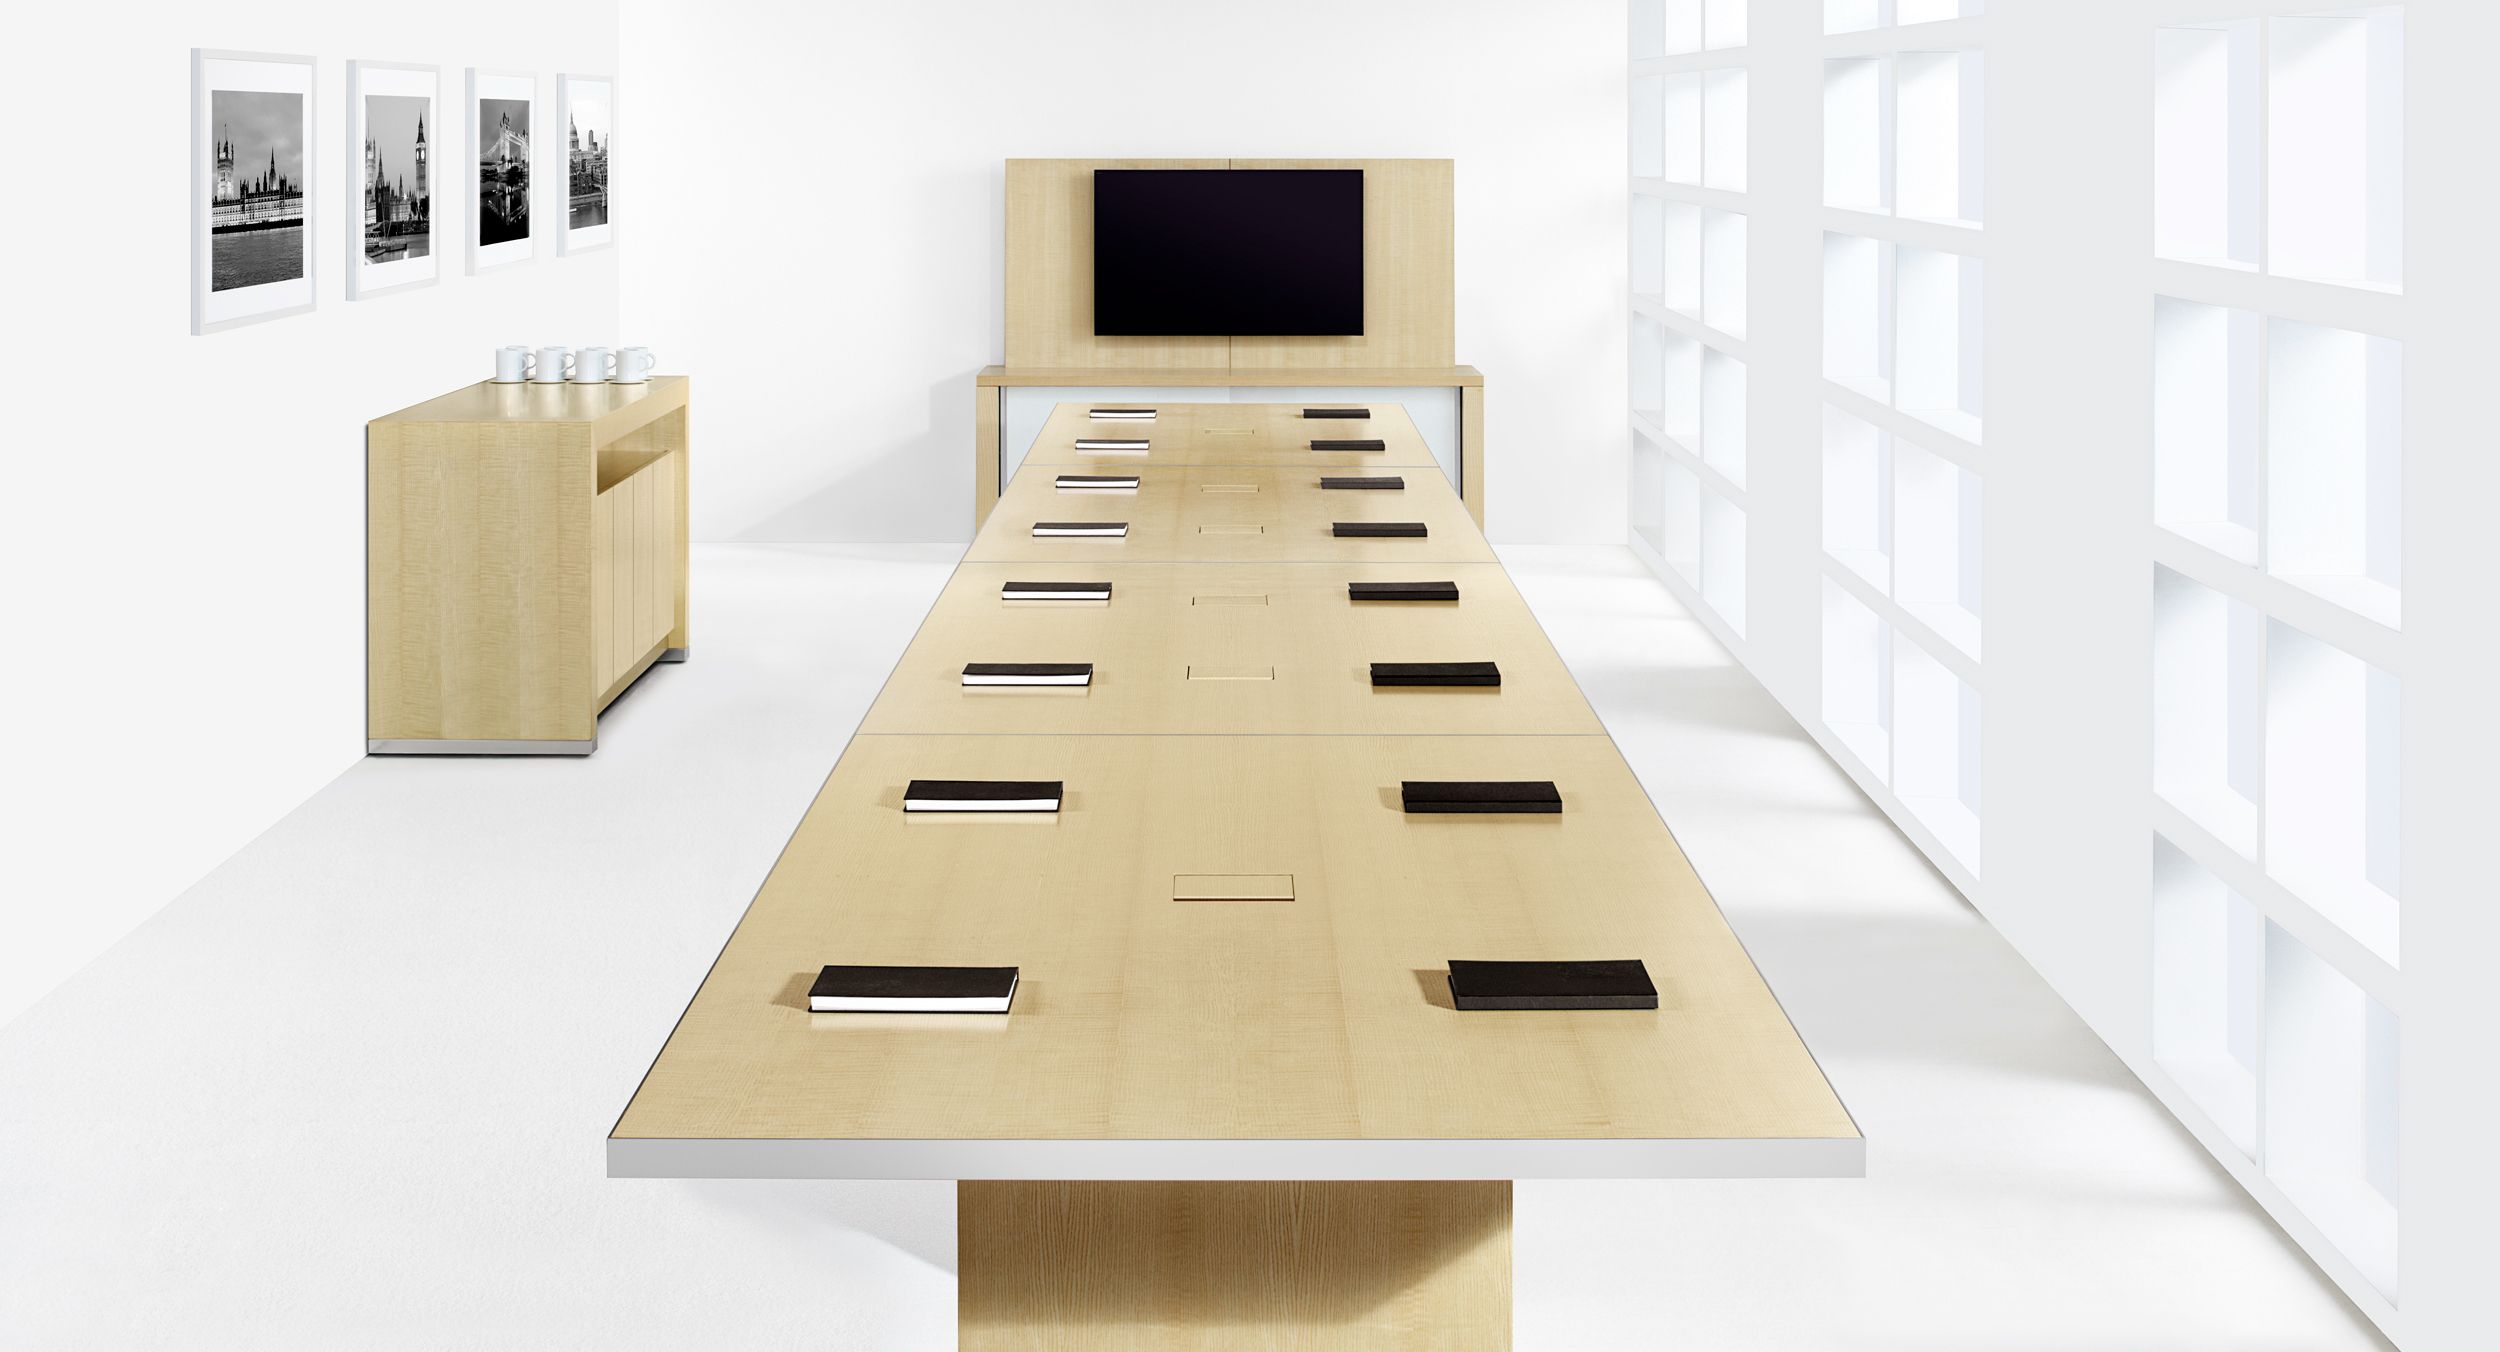 Motus pairs uncompromising aesthetics with an innovative and intuitive interface to redefine reconfigurable tables. 